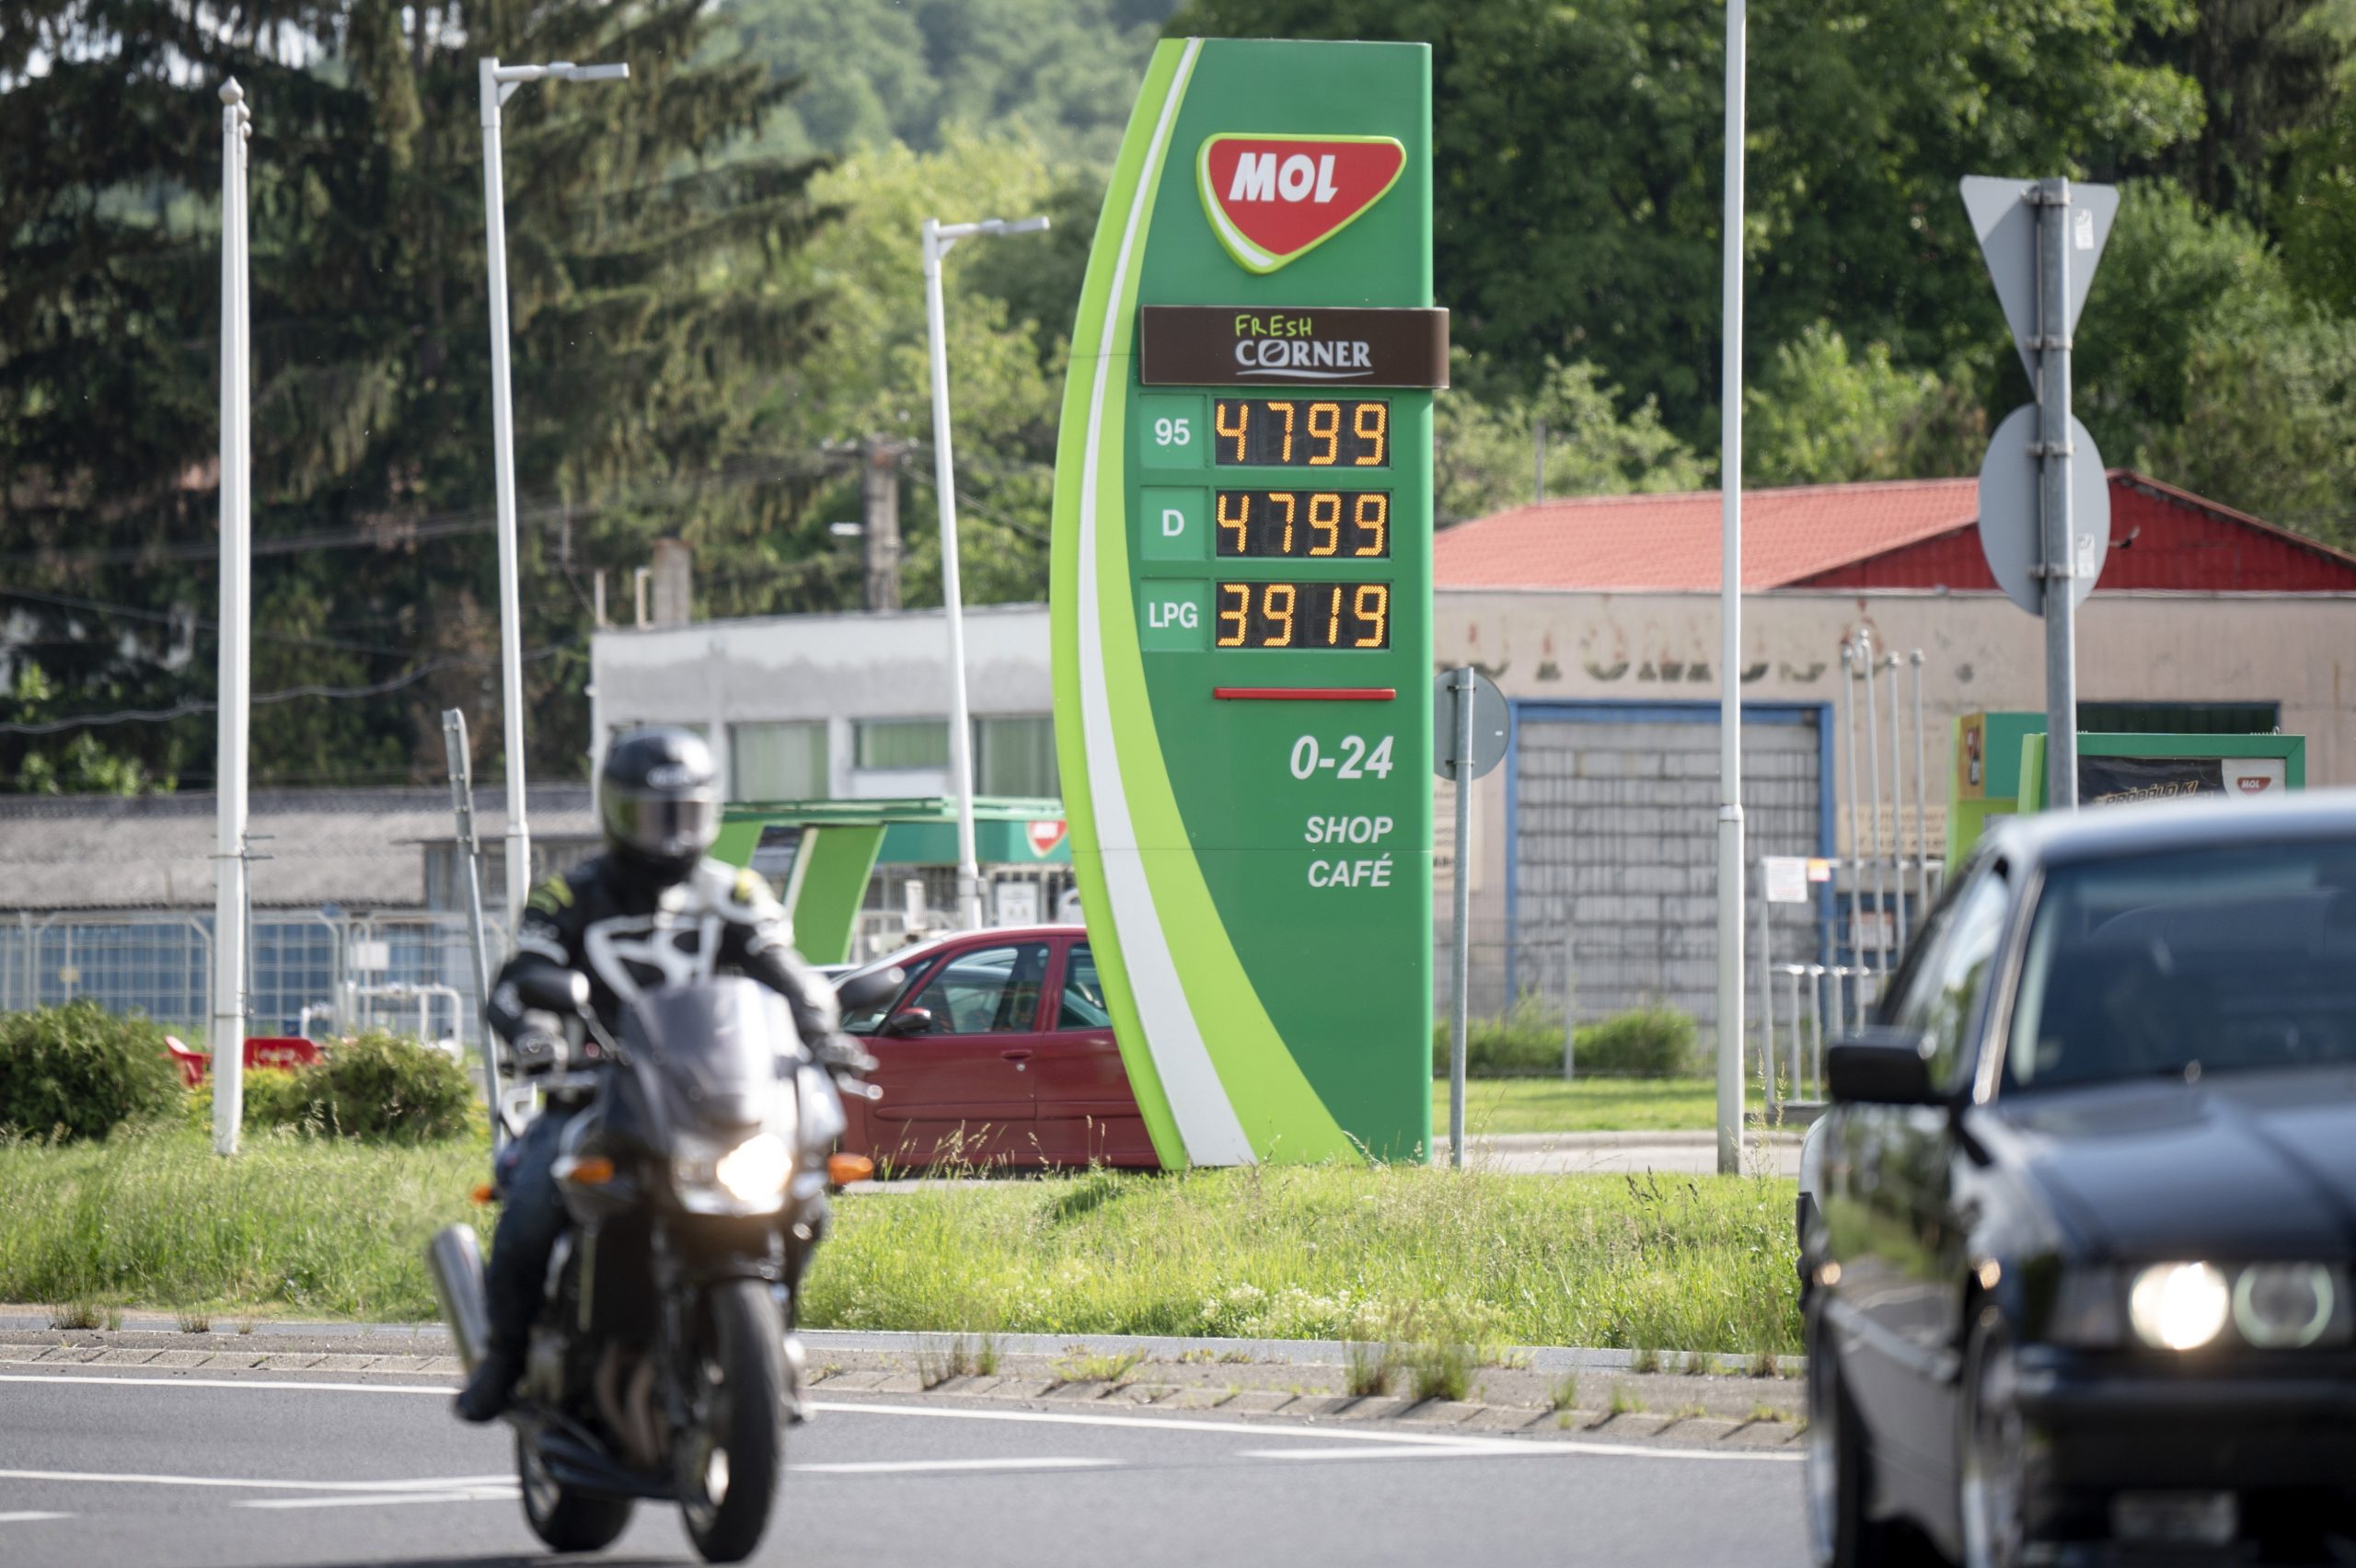 Hungarian License Plates Being Stolen after Restrictions due to Capped Fuel Prices